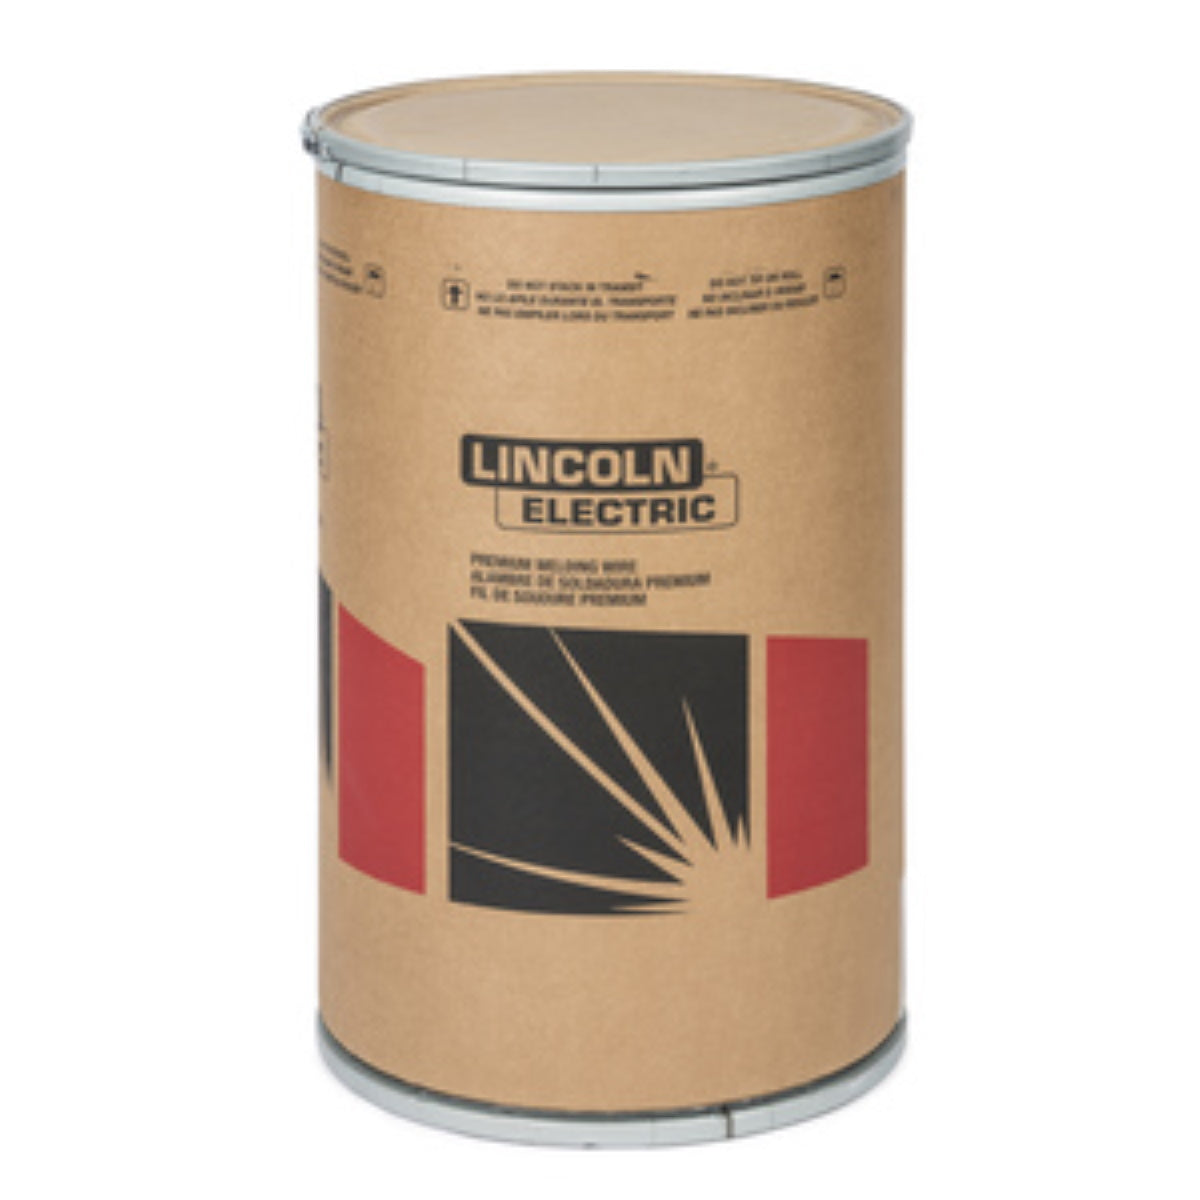 Lincoln Murex 316LSI Stainless MIG Wire .035 500lb Drum (ED0035614)